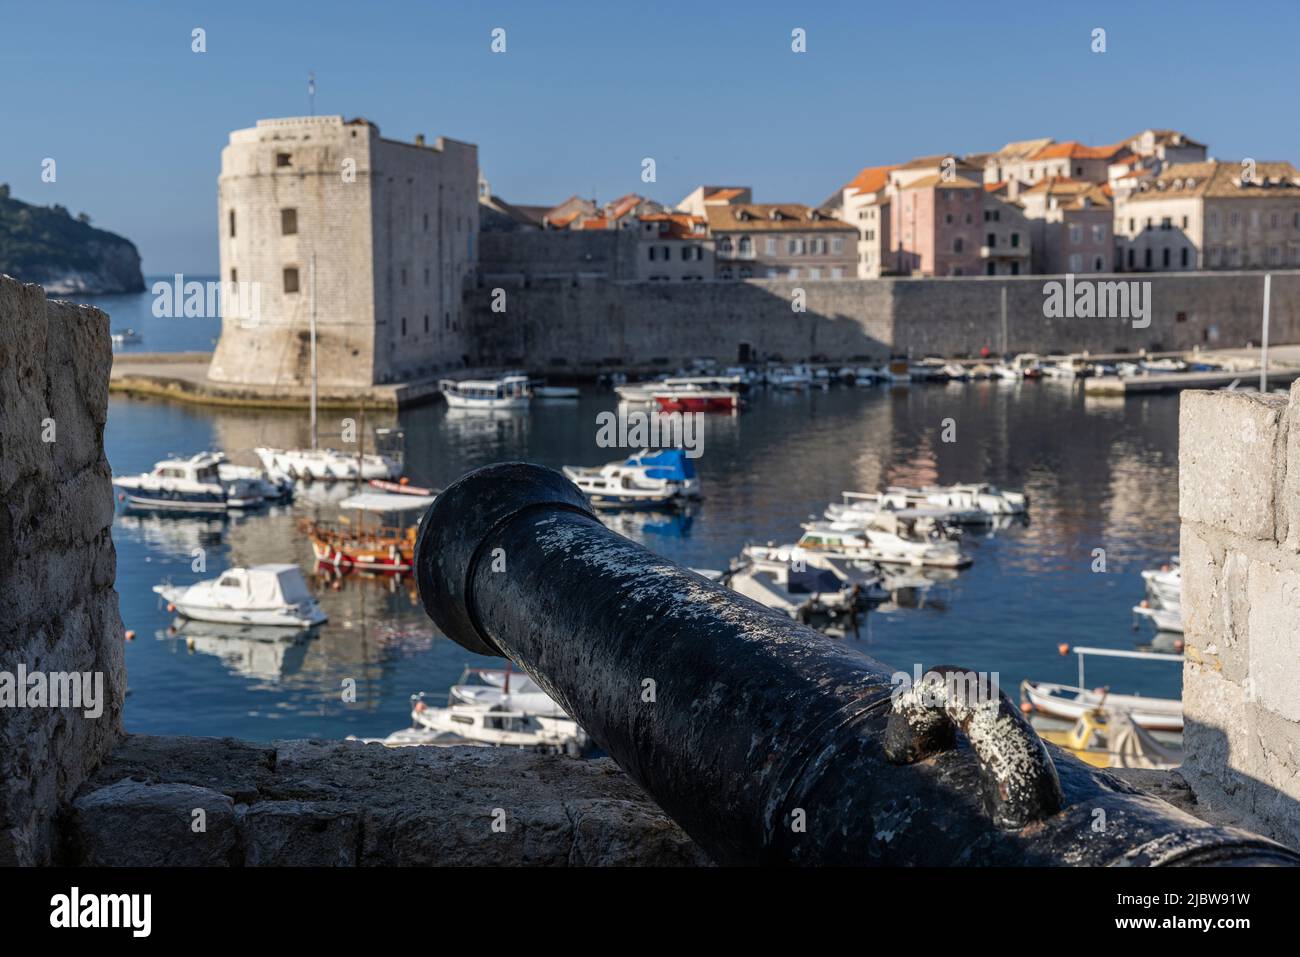 Cannon Overlooking the Harbor of Dubrovnik Old Town, Croatia Stock Photo